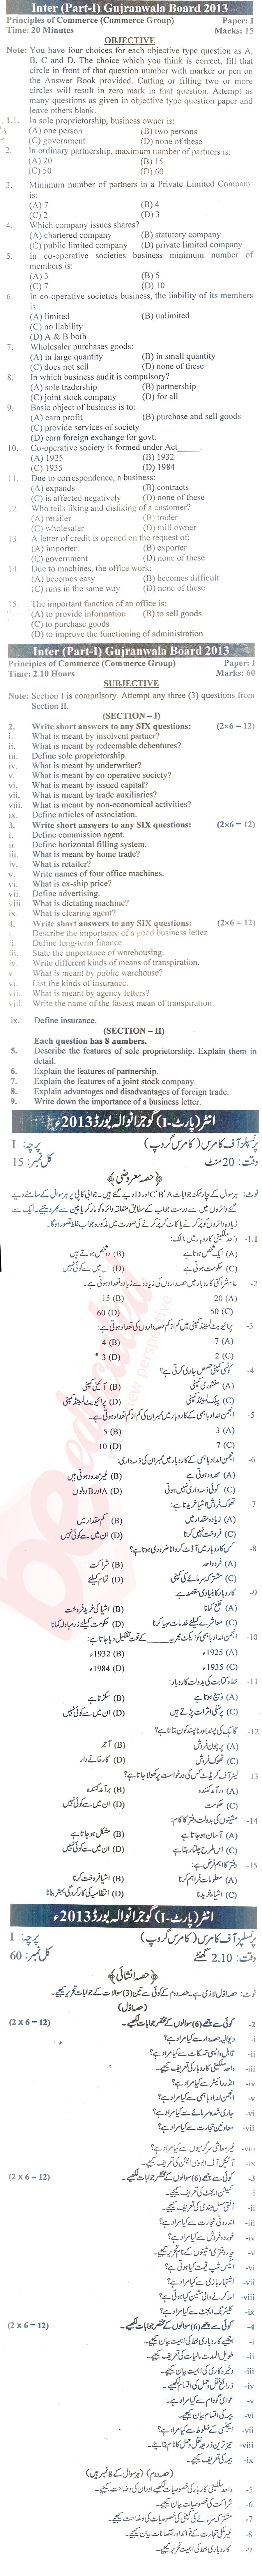 Principles of Commerce ICOM Part 1 Past Paper Group 1 BISE Gujranwala 2013